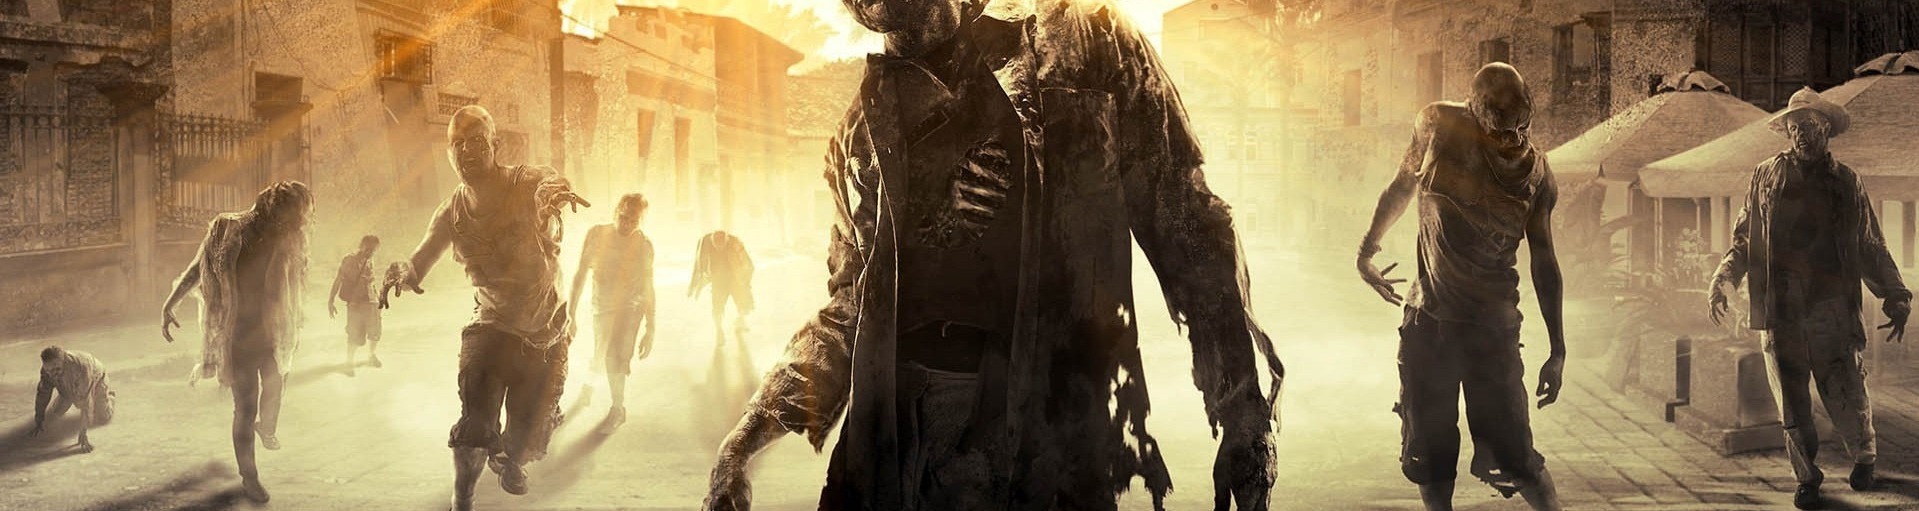 dying light free steam code